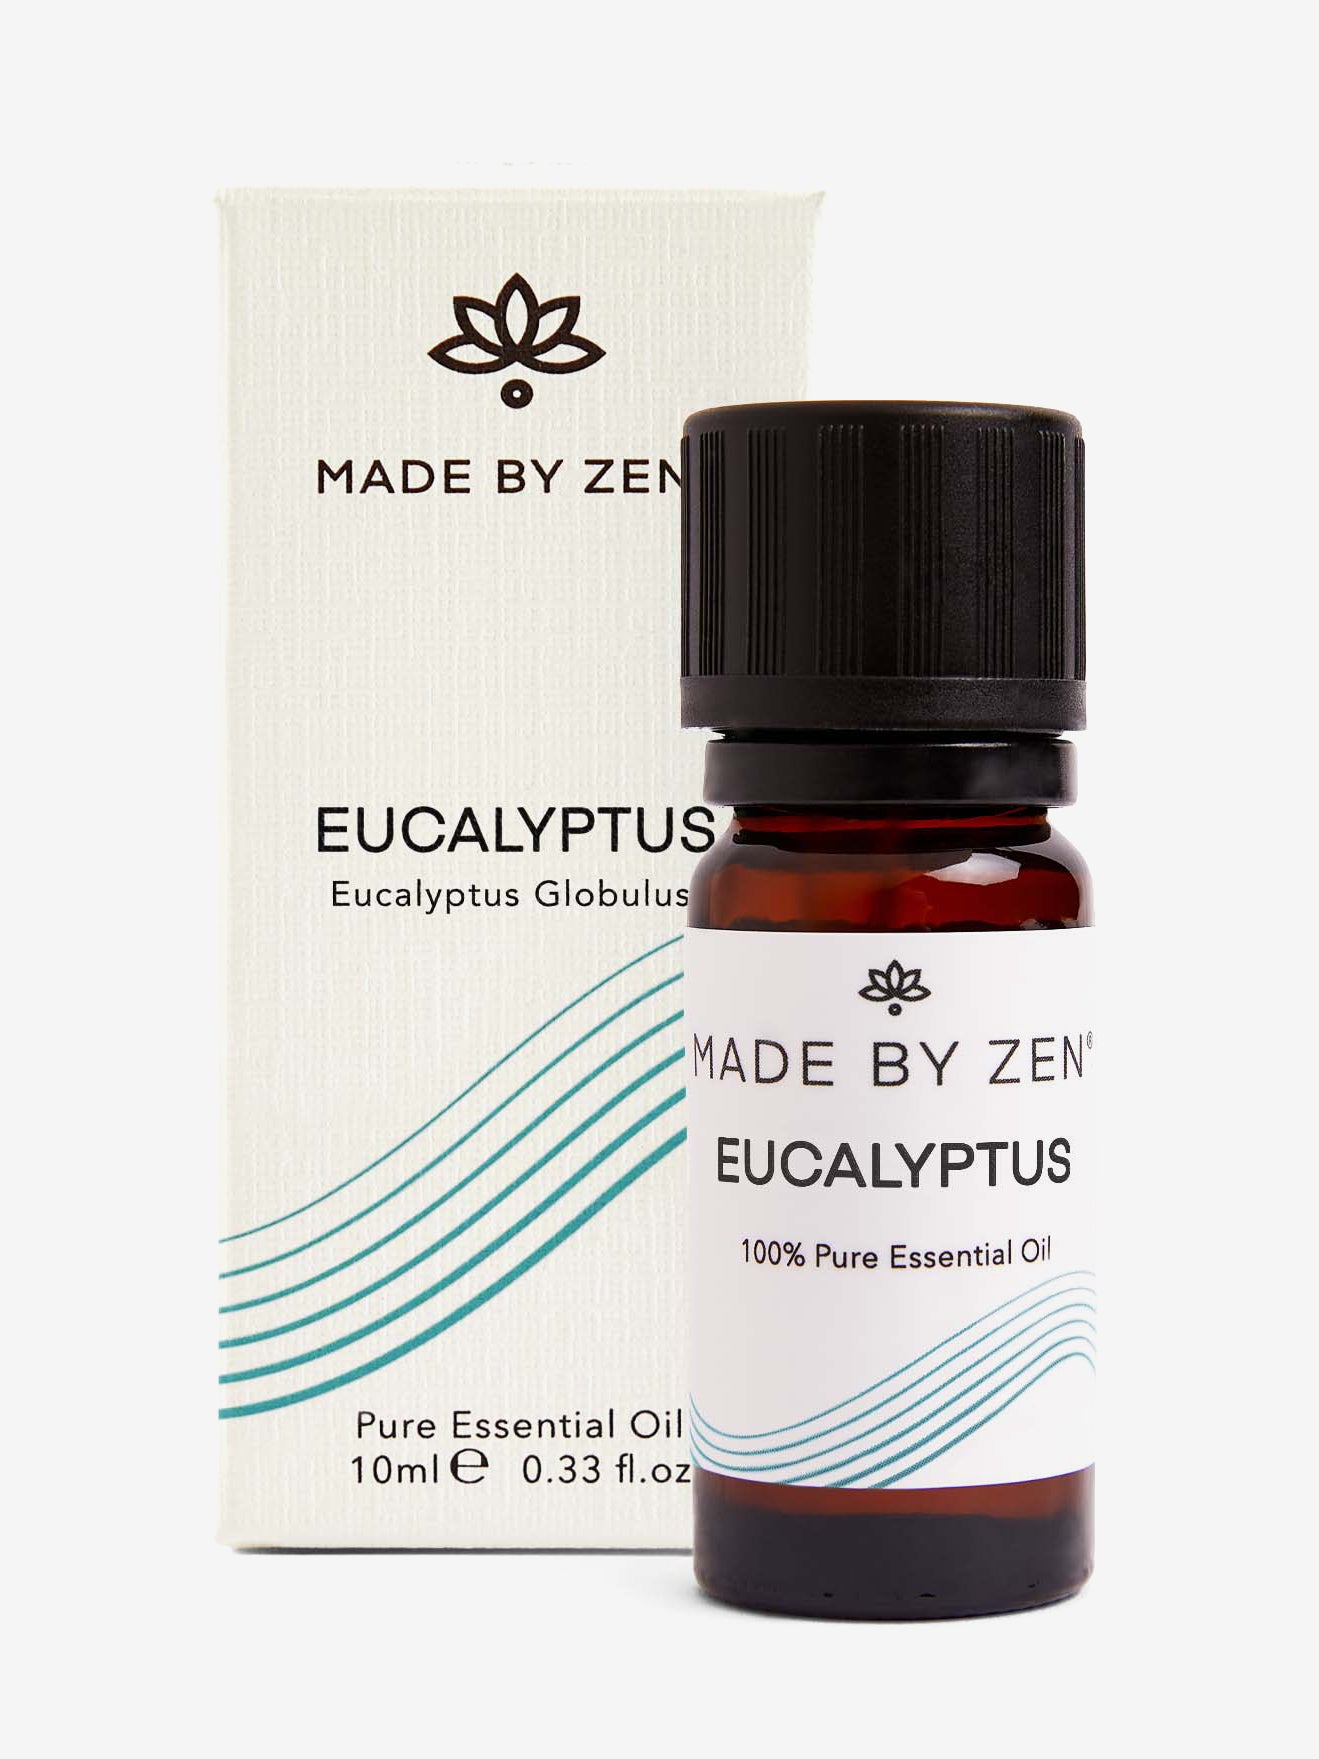 Made by Zen Classic Essential Oil - Eucalyptus